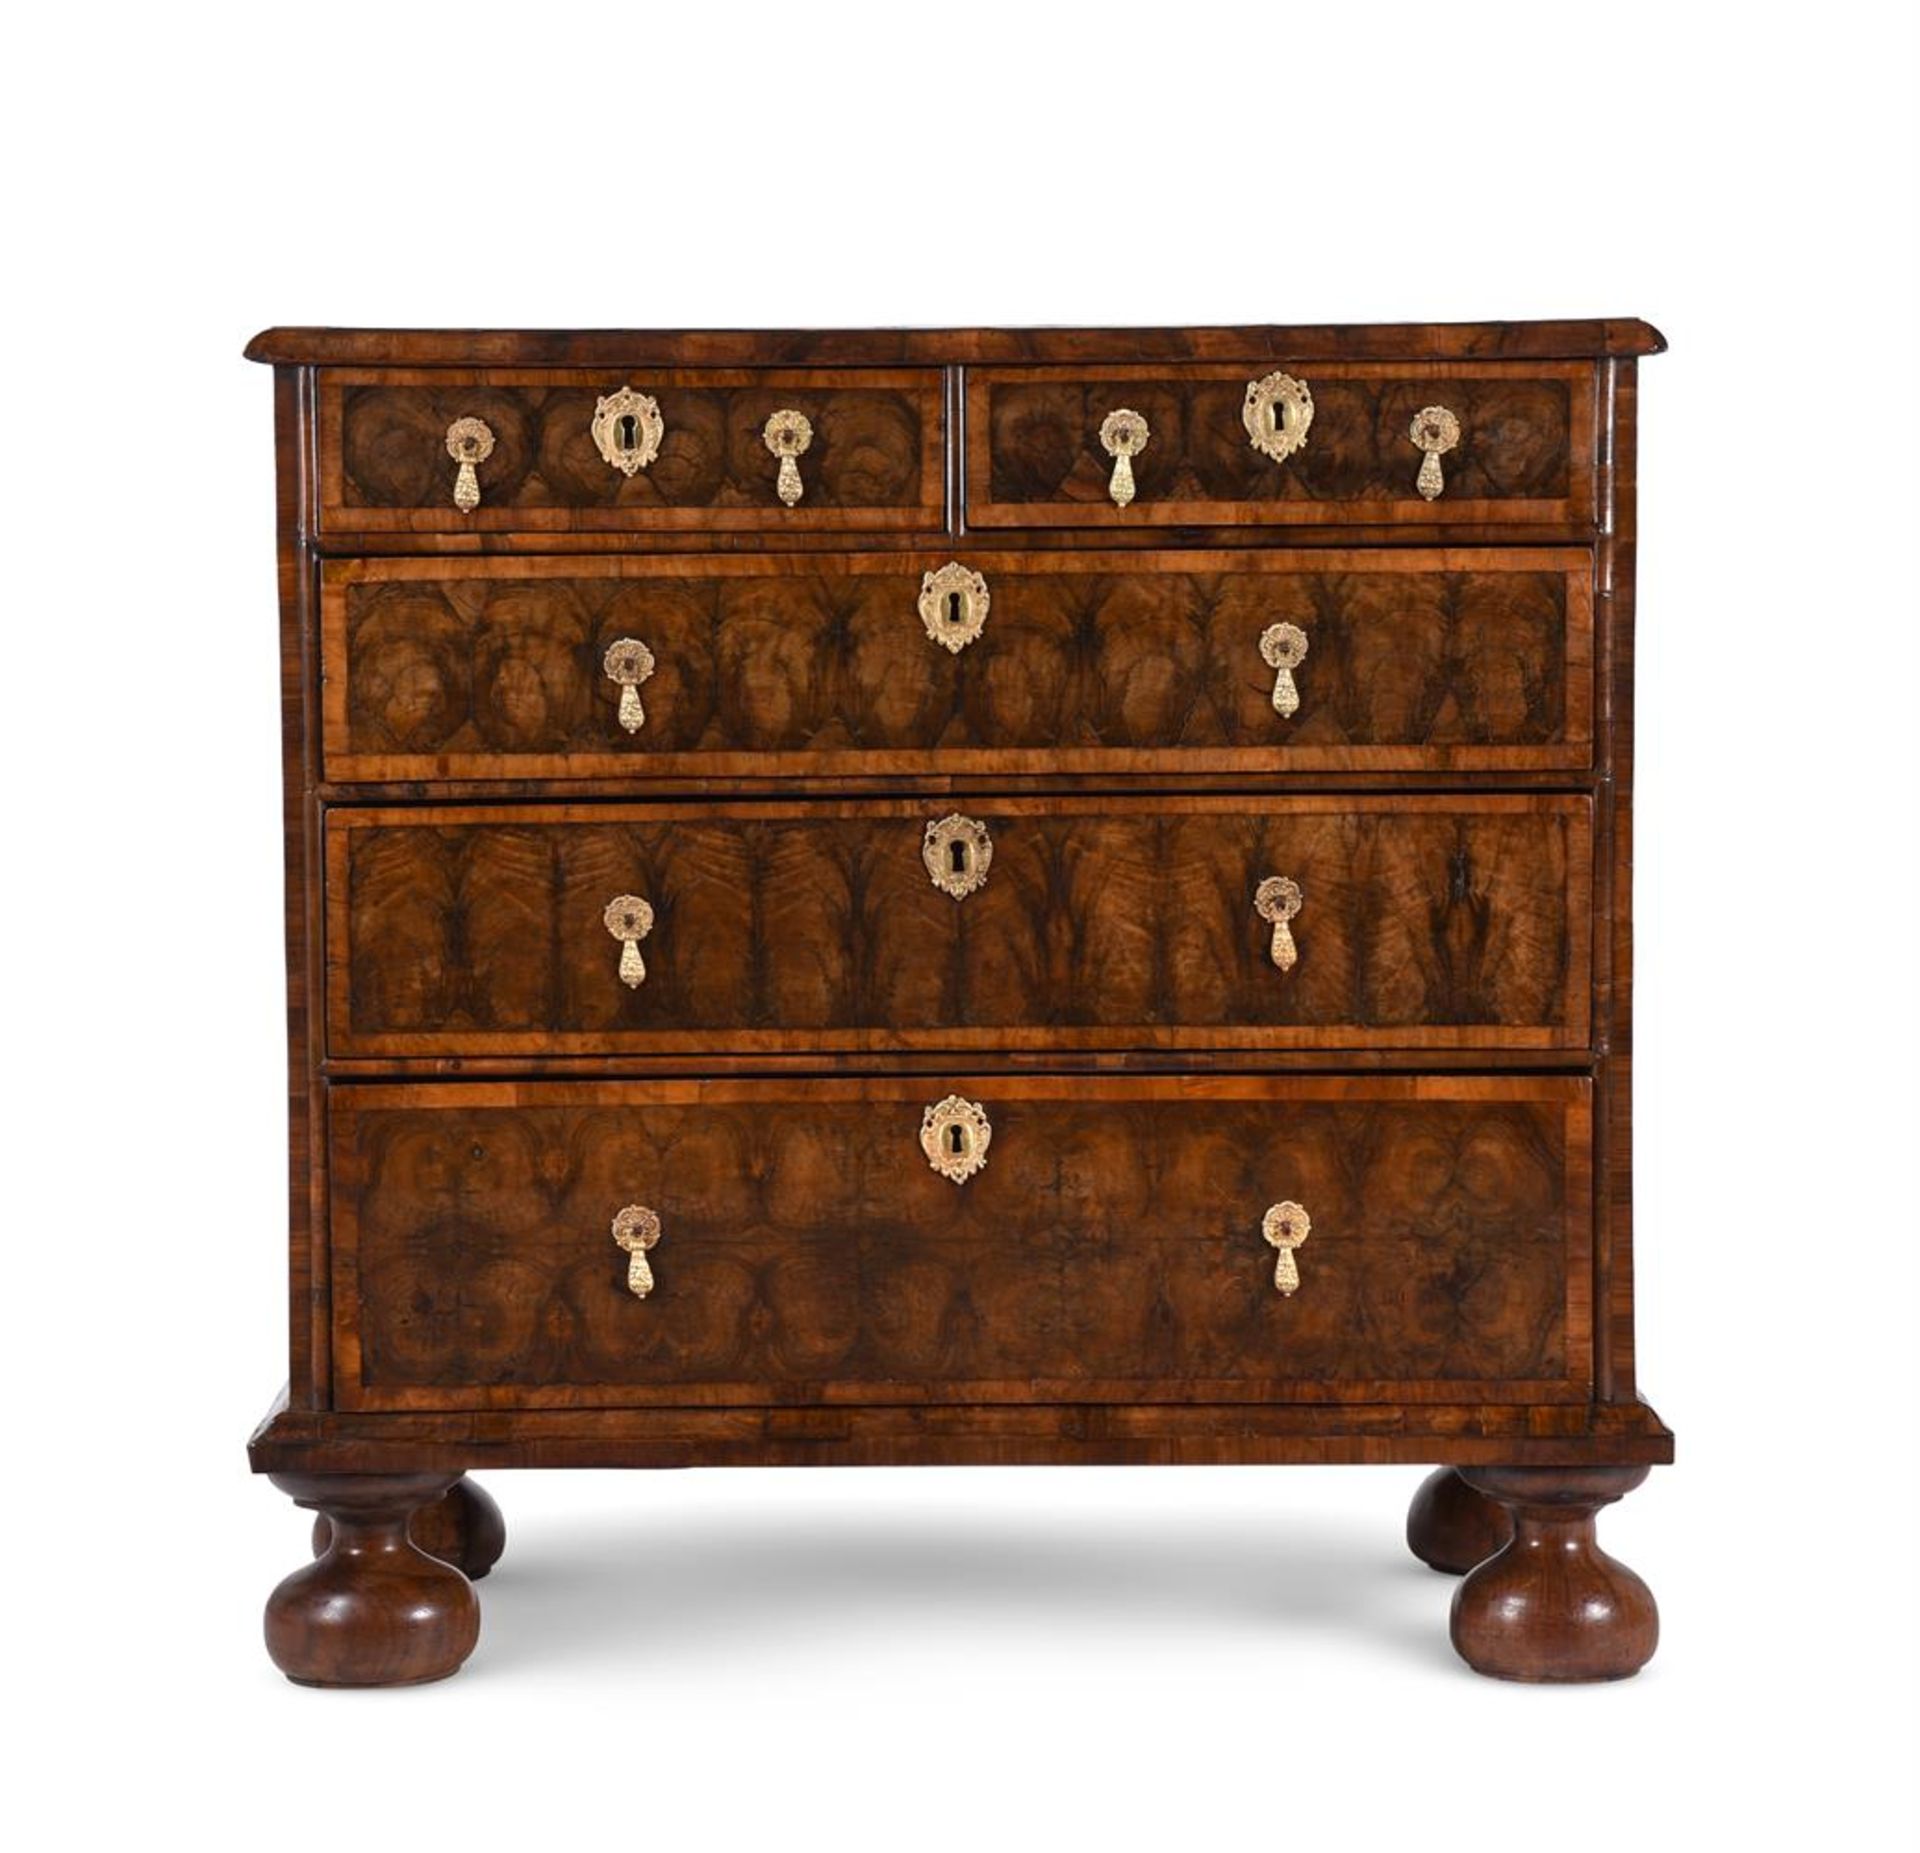 A WILLIAM & MARY OLIVEWOOD OYSTER VENEERED CHEST OF DRAWERS, CIRCA 1690